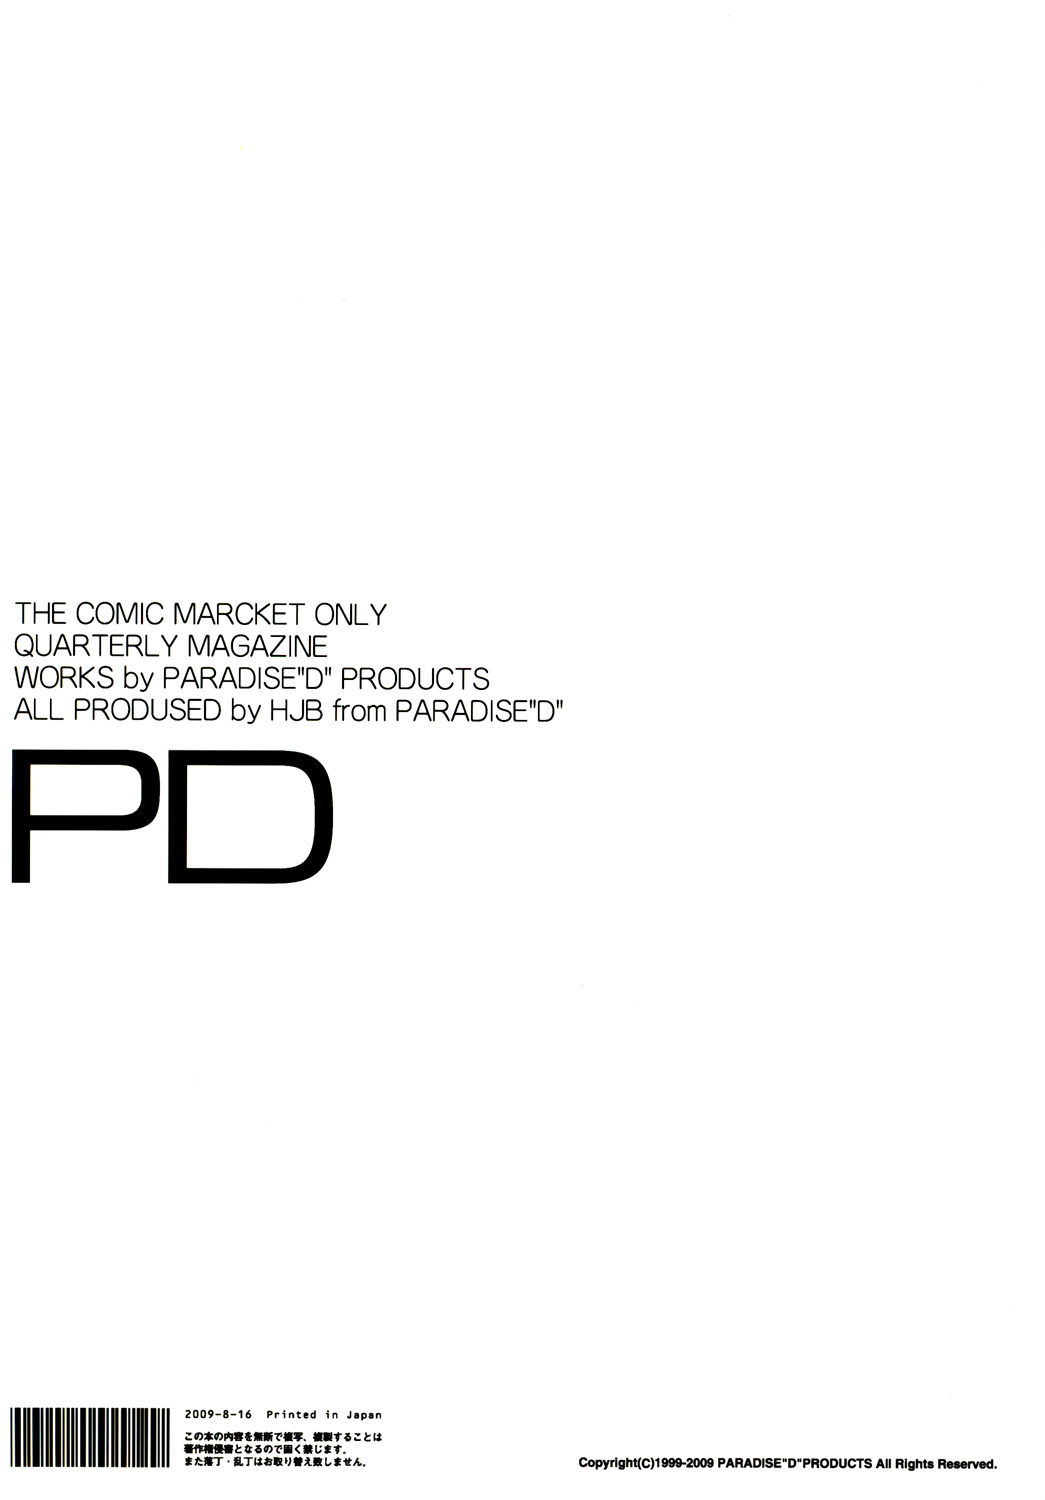 (C76) [ParadiseD Products (HJB)] PD Vol. X-2 (Final Fantasy X-2) page 26 full